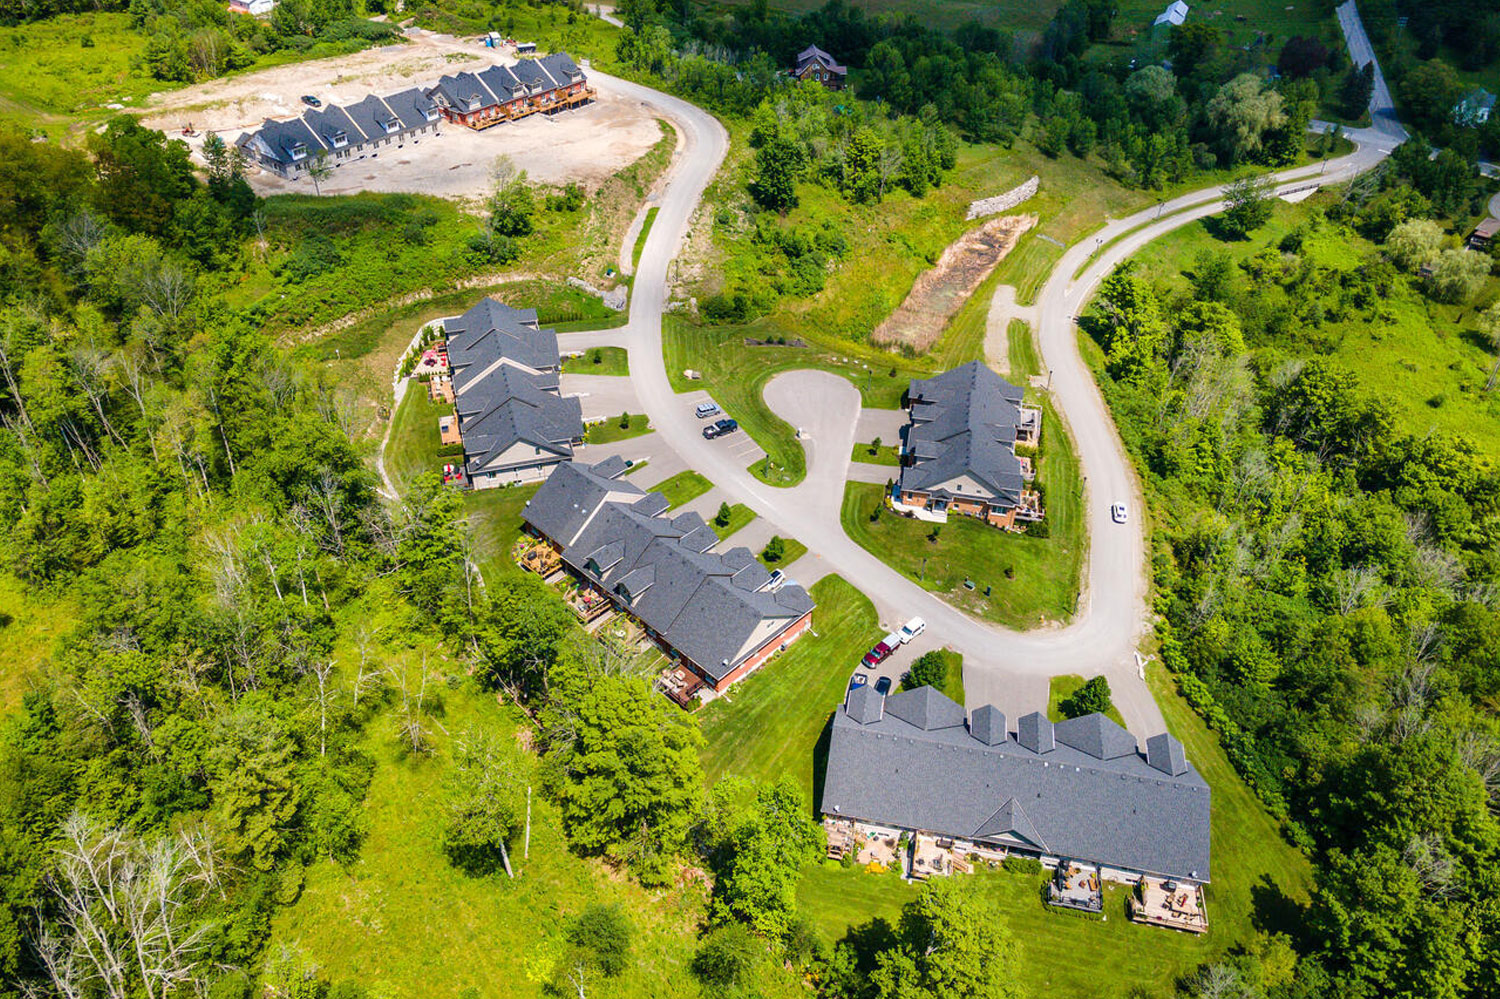 Orchard Hill Country Townhome development